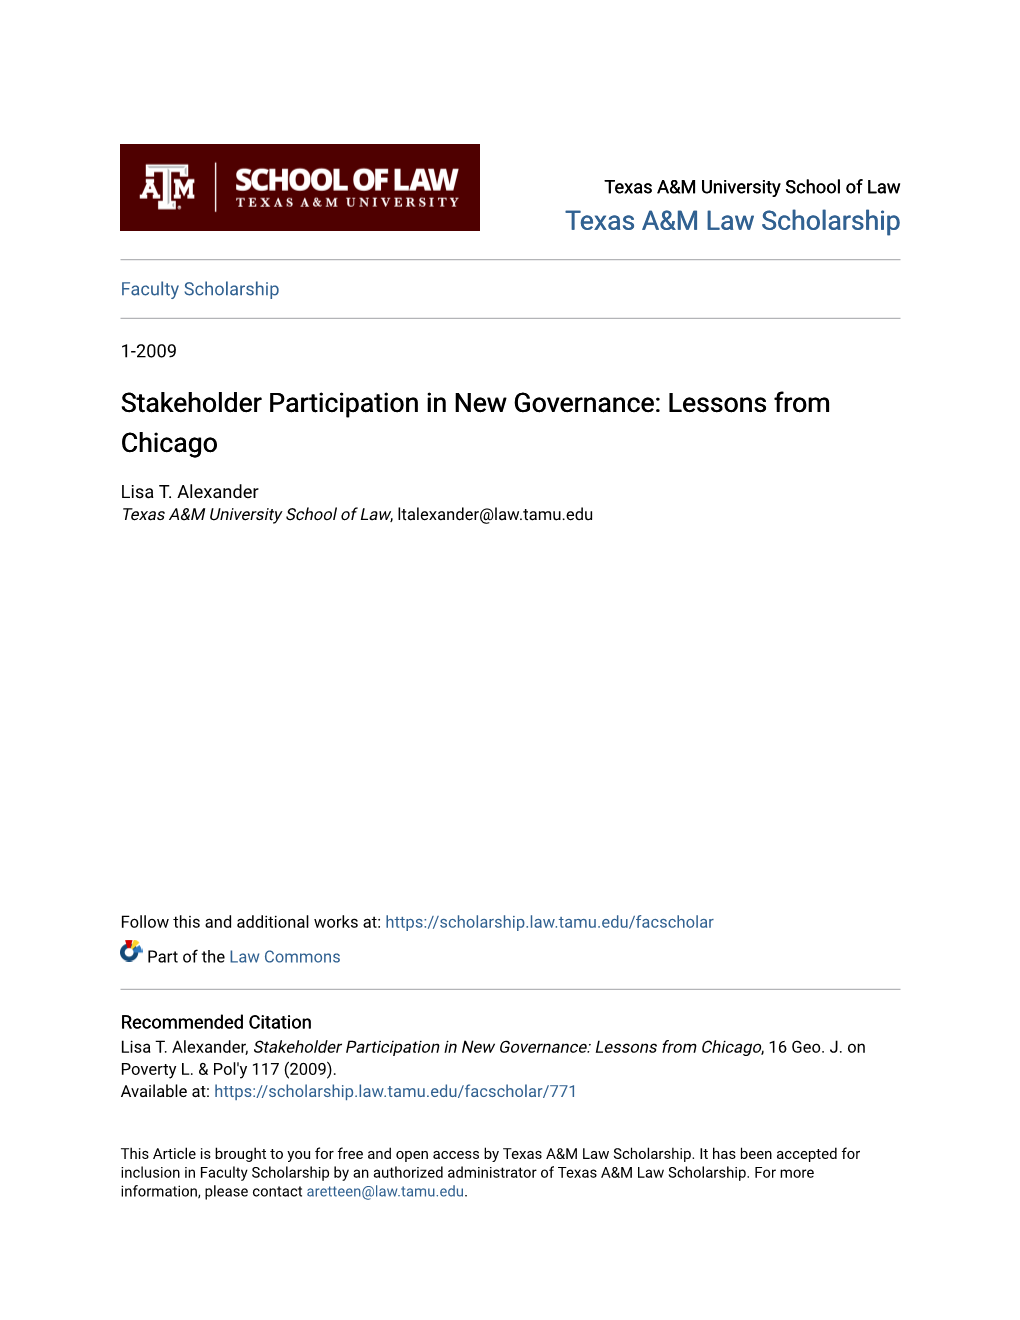 Stakeholder Participation in New Governance: Lessons from Chicago